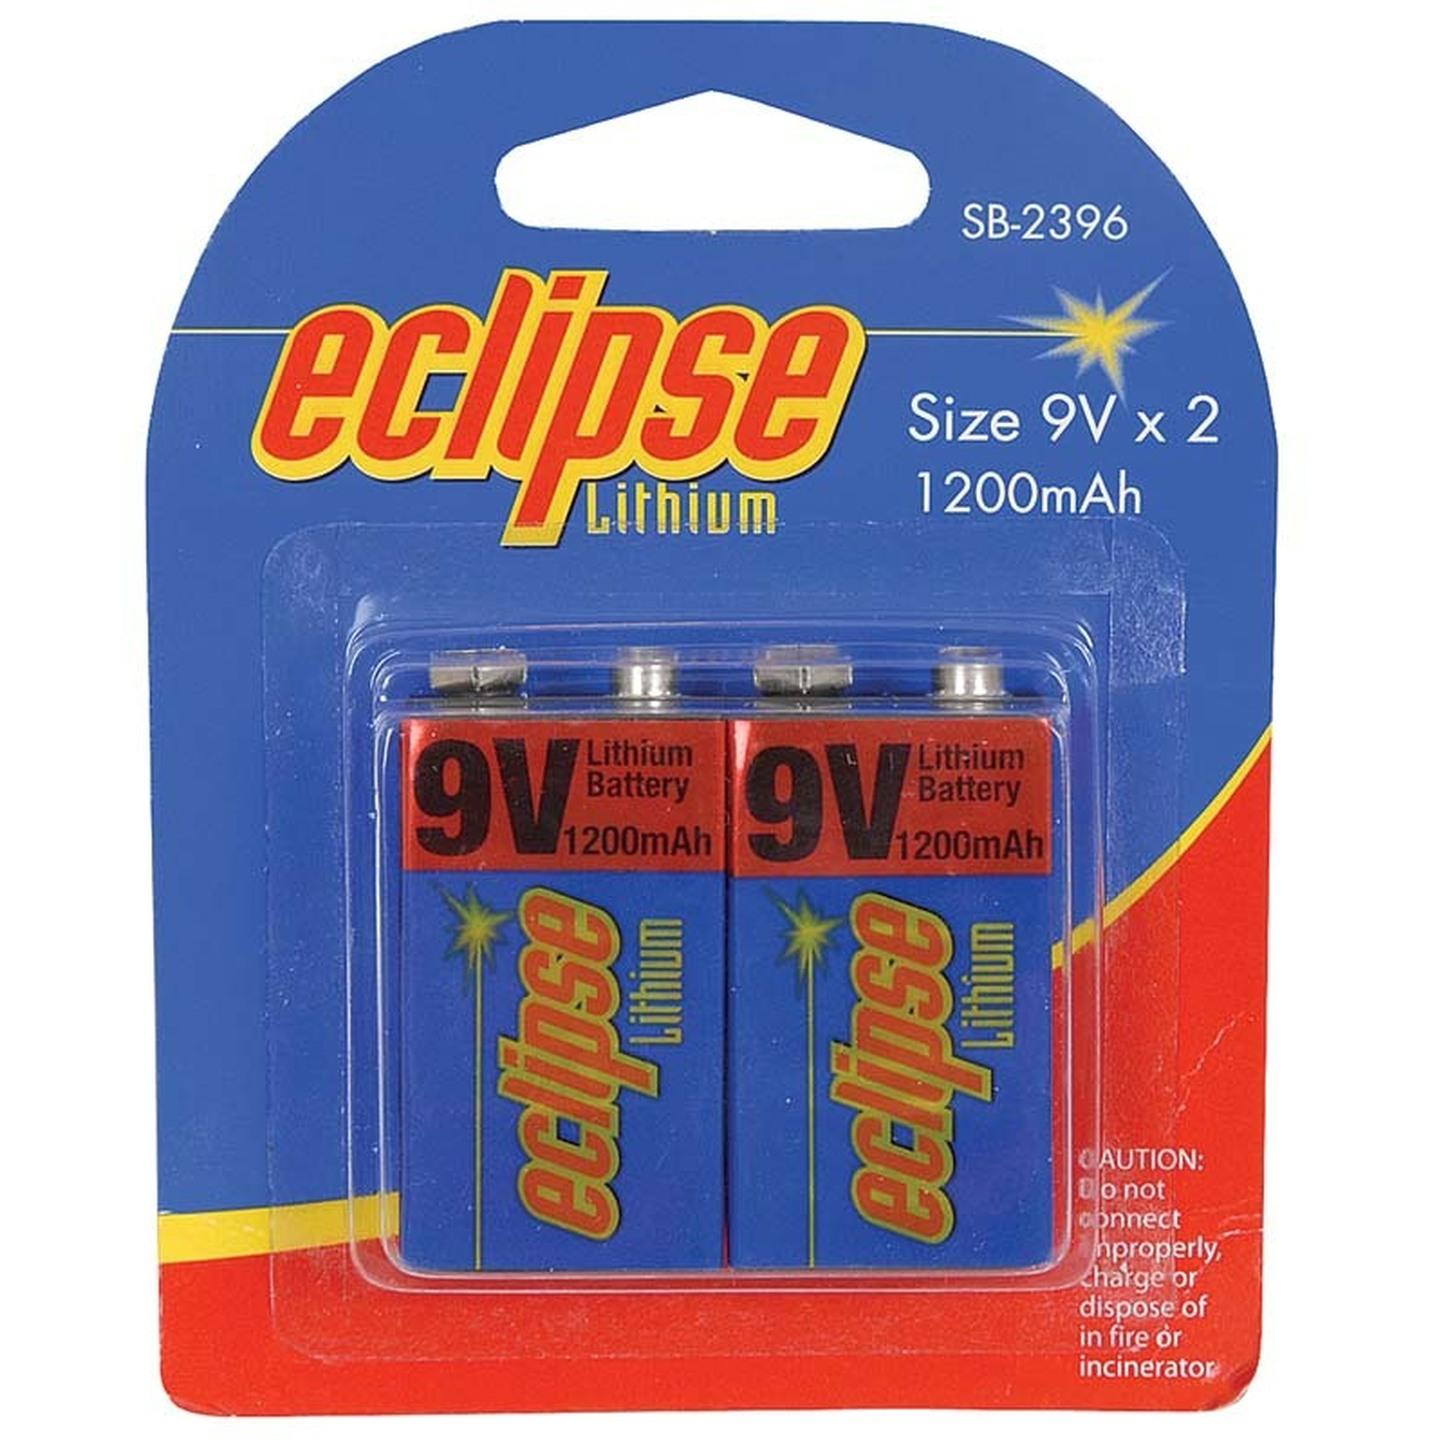 Eclipse Lithium 9V Battery 1200mAh Pack 2